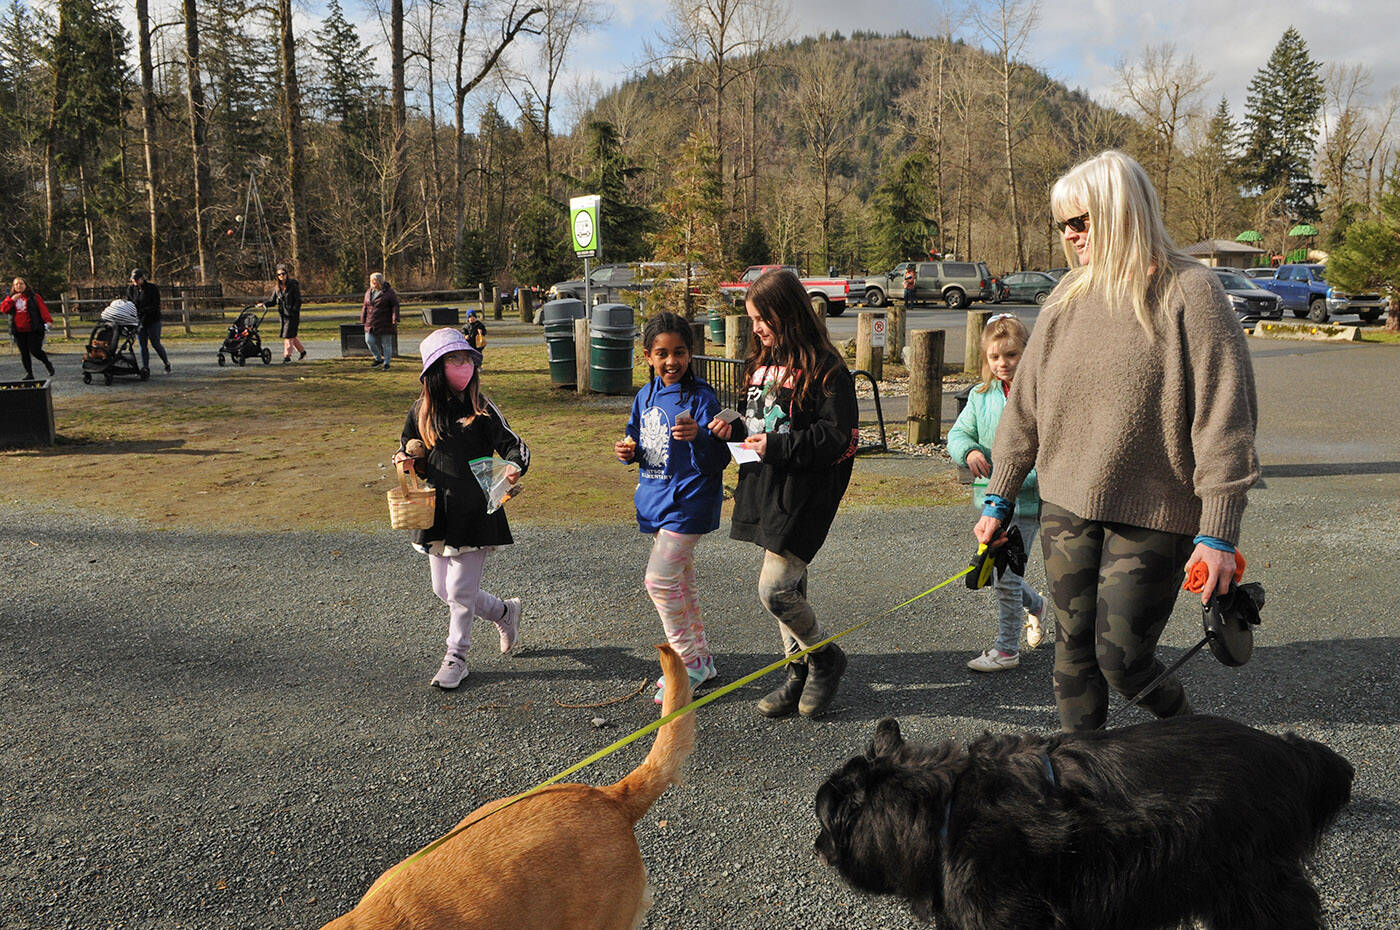 Kids from Watson Elementary prepare to buy a stranger a coffee at Vedder Park during Watson Elementary’s Kindness Project on Wednesday, March 15, 2023. (Jenna Hauck/ Chilliwack Progress)